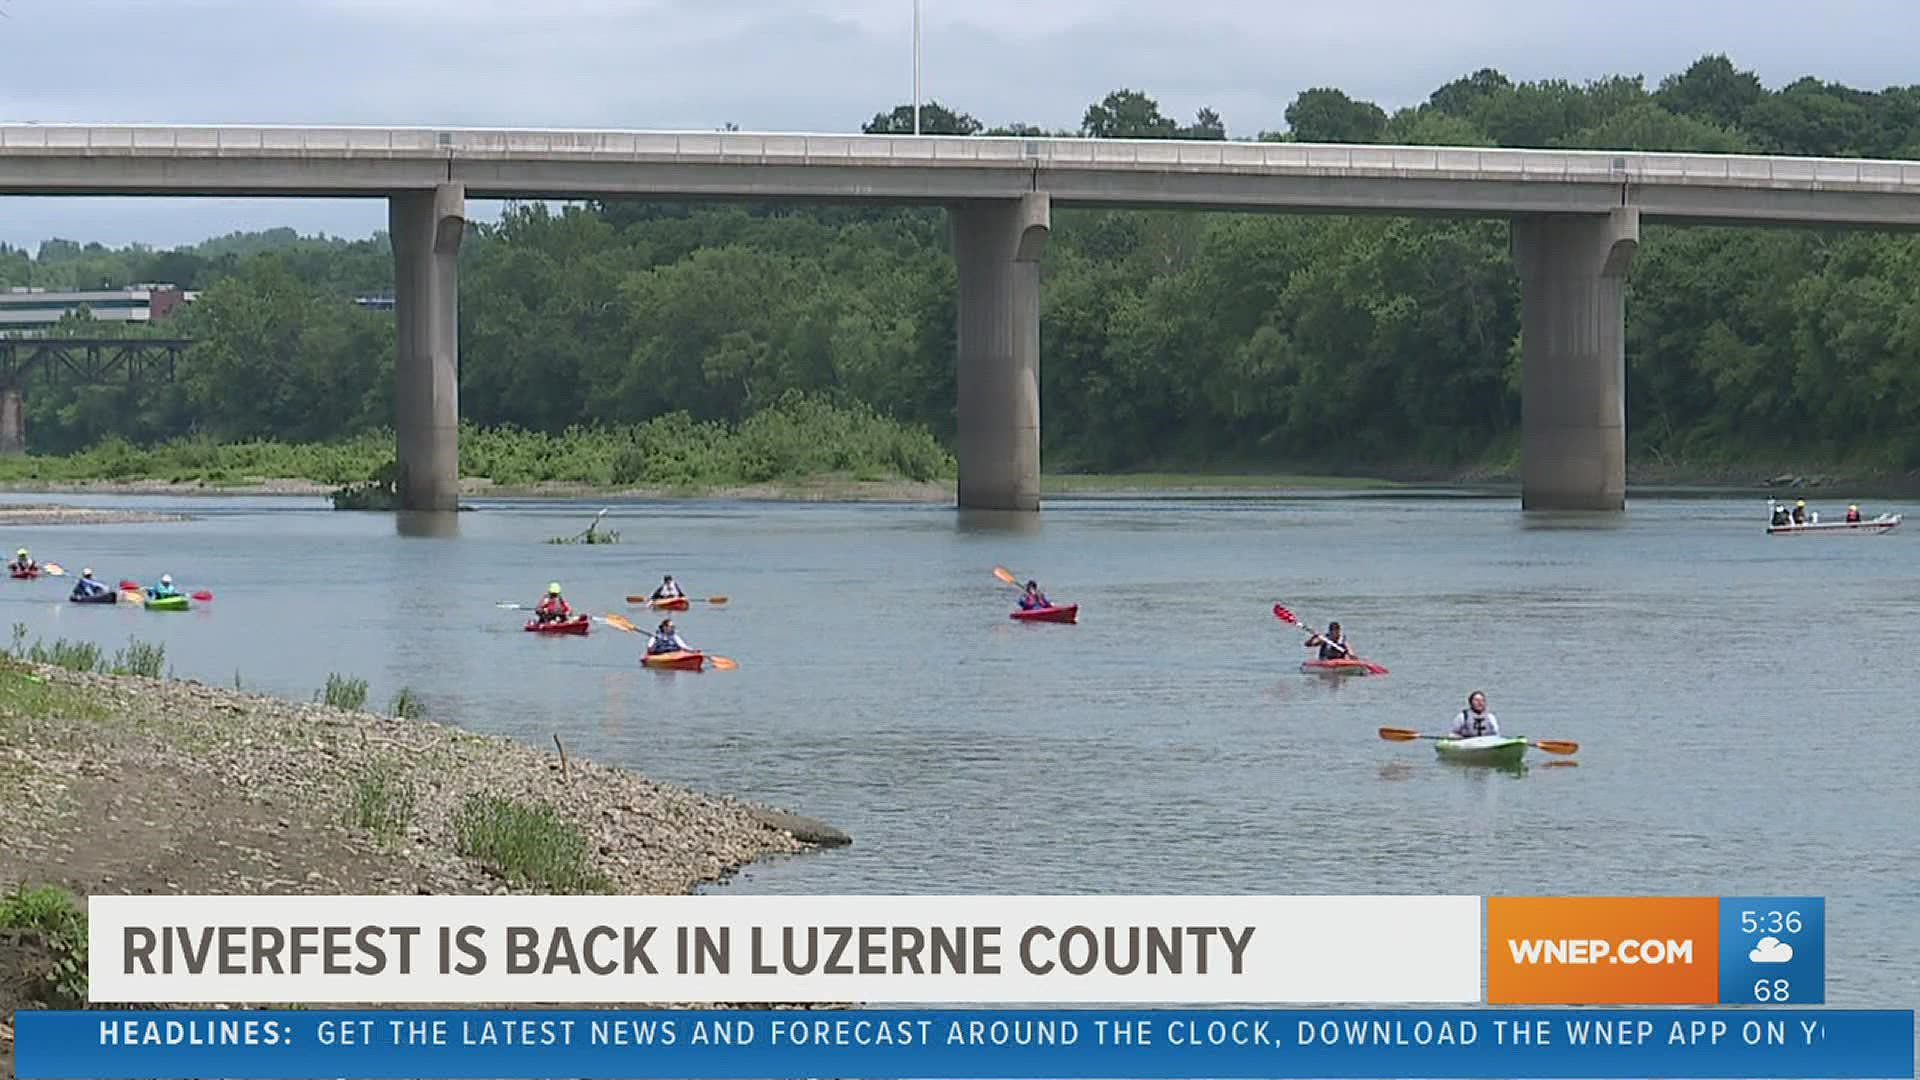 The banks of the Susquehanna River are turning into a hotspot this weekend in Luzerne County. RiverFest is back.